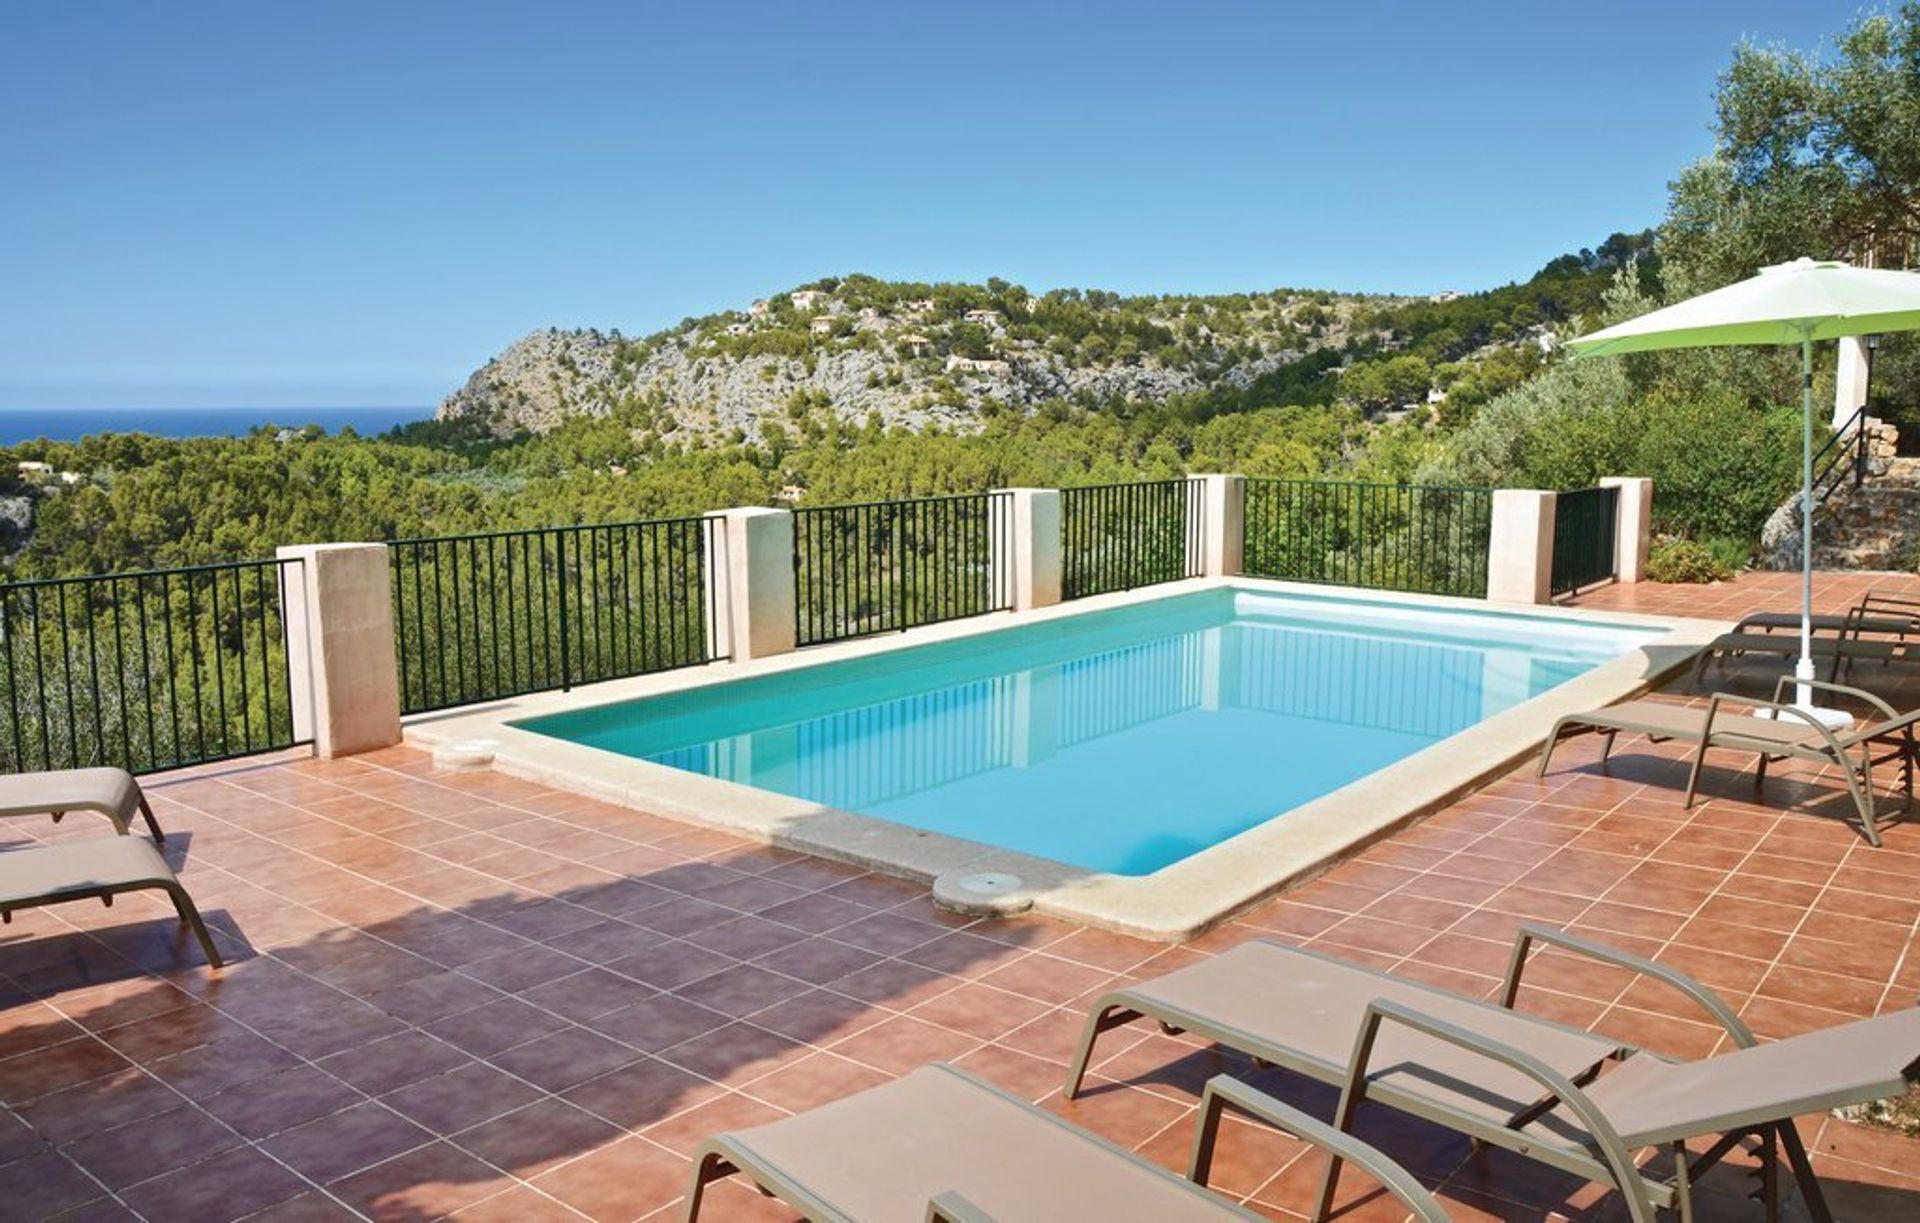 Four bedroom villa in Sóller with private pool. Stunning views!